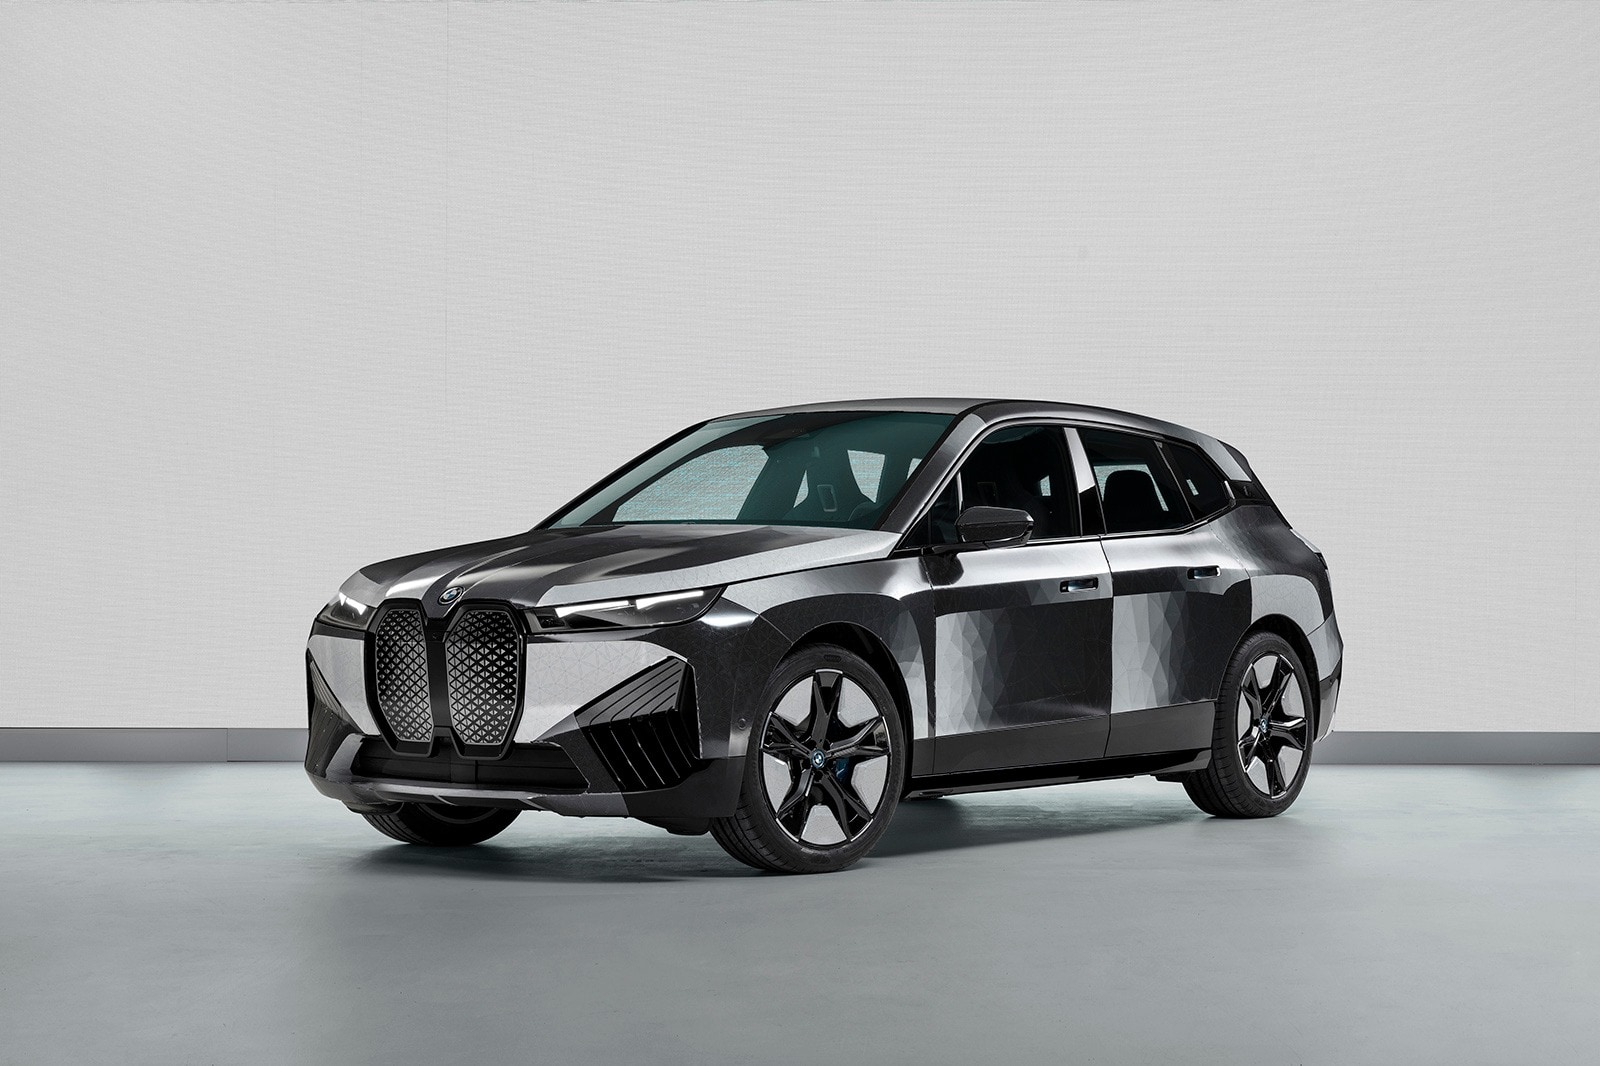 BMW E Ink Gives New Meaning to "Throwing Shade"